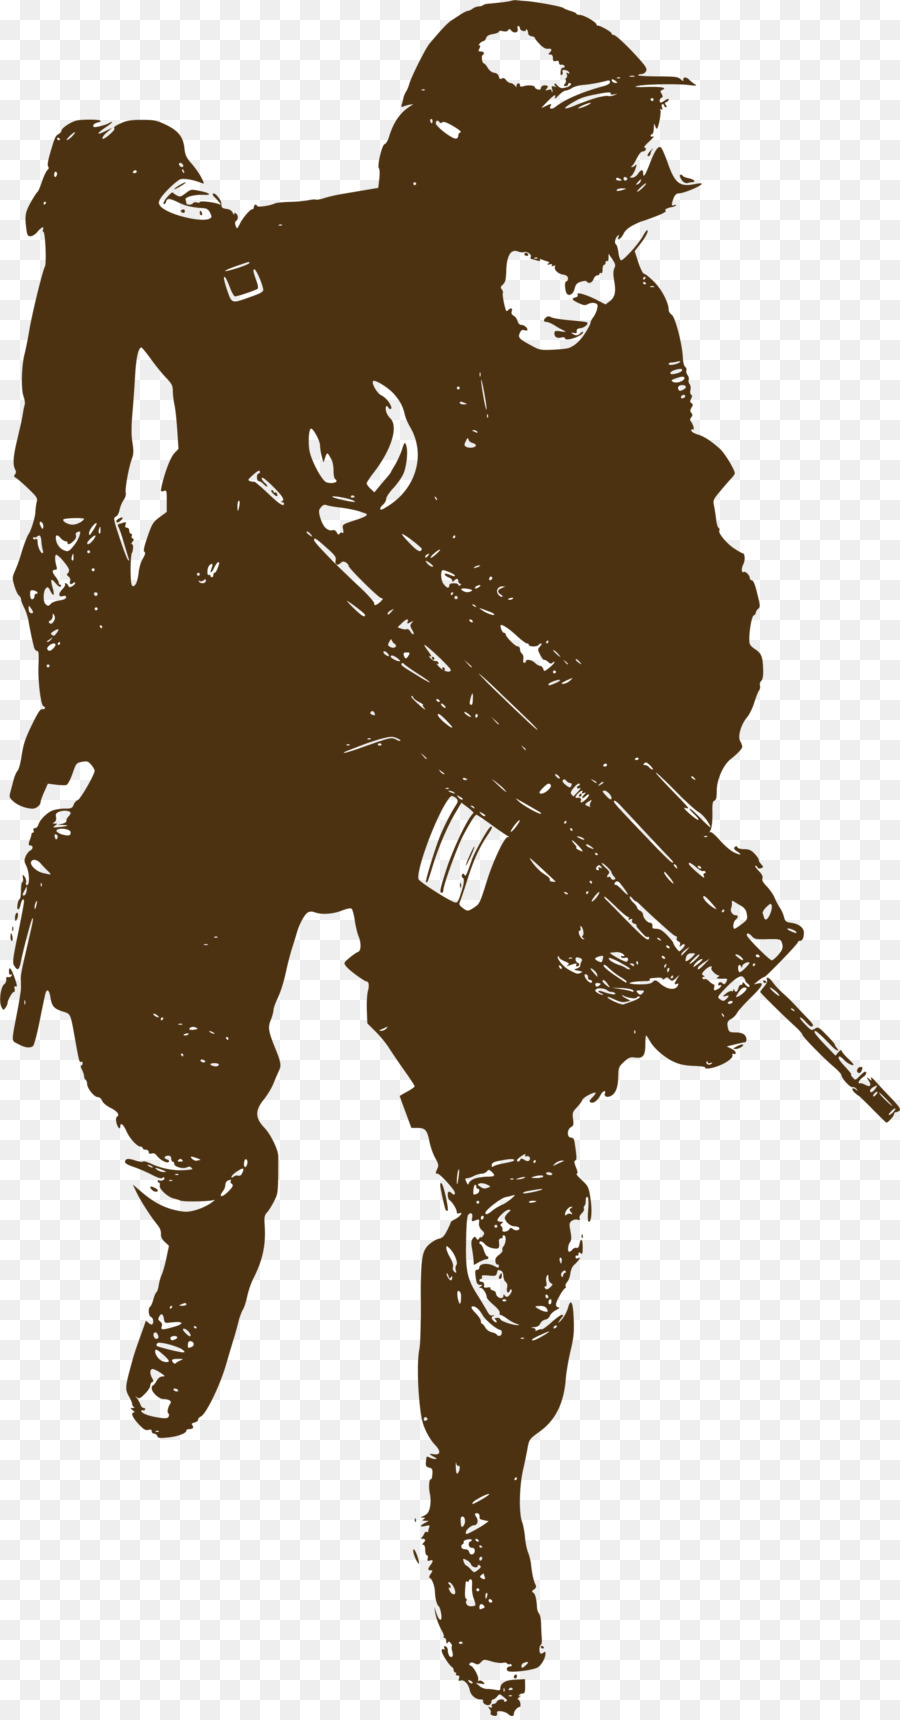 Soldier Sticker Military Decal - Brown line soldier png download - 2000*3814 - Free Transparent Soldier png Download.